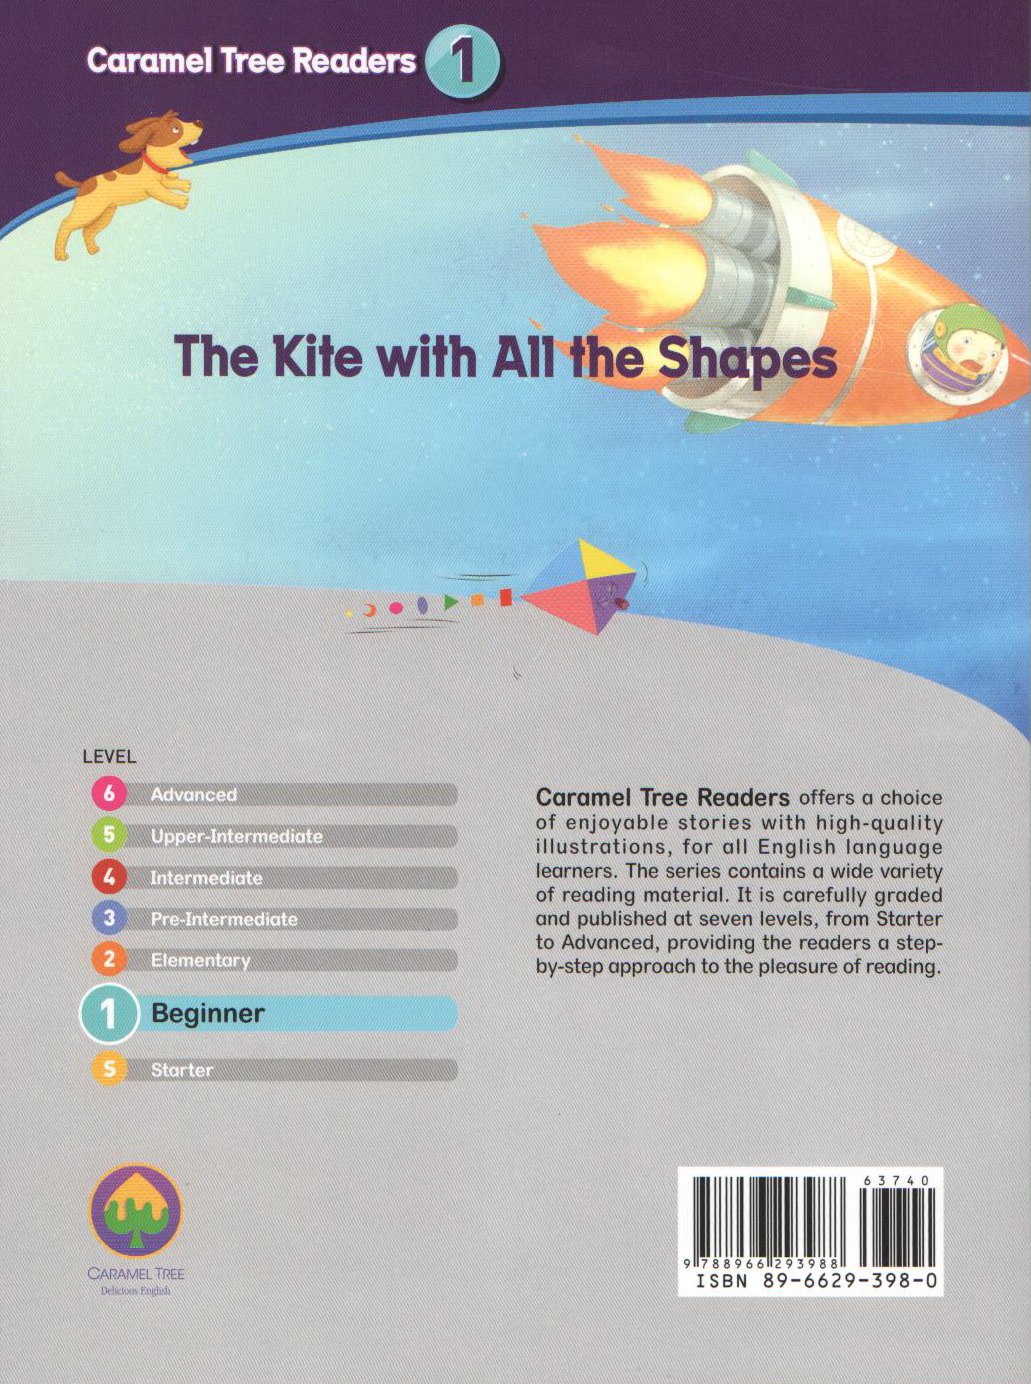 CARAMEL TREE 1:THE KITE WITH ALL THE SHAPES BY DKTODAY